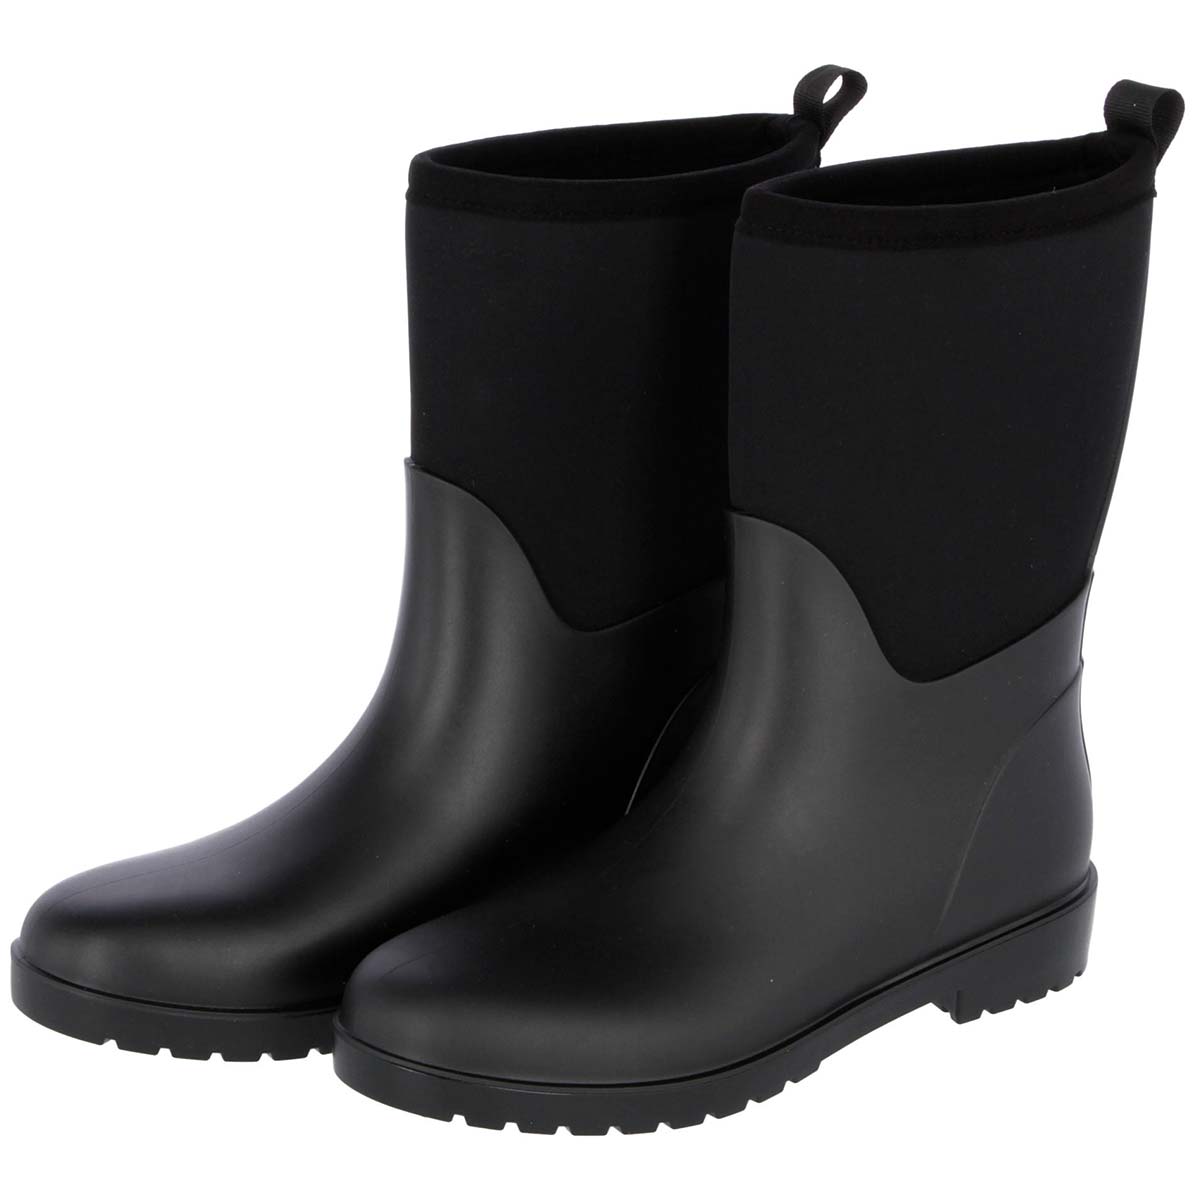 Boots NeoLite 41